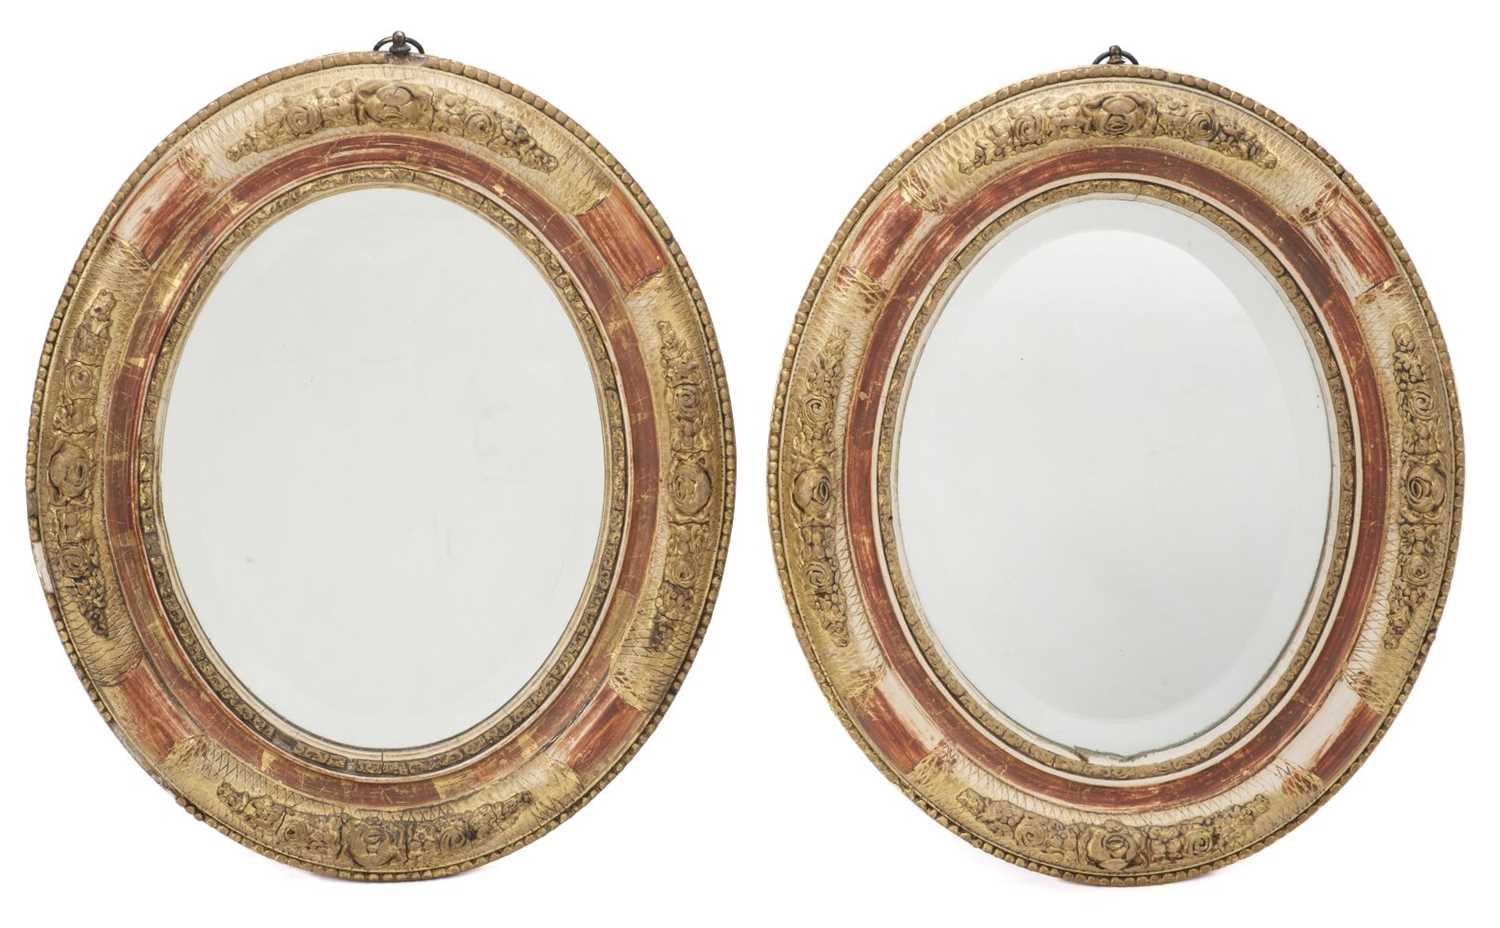 Lot 429 - Mirrors. An attractive pair of late Victorian oval giltwood mirrors